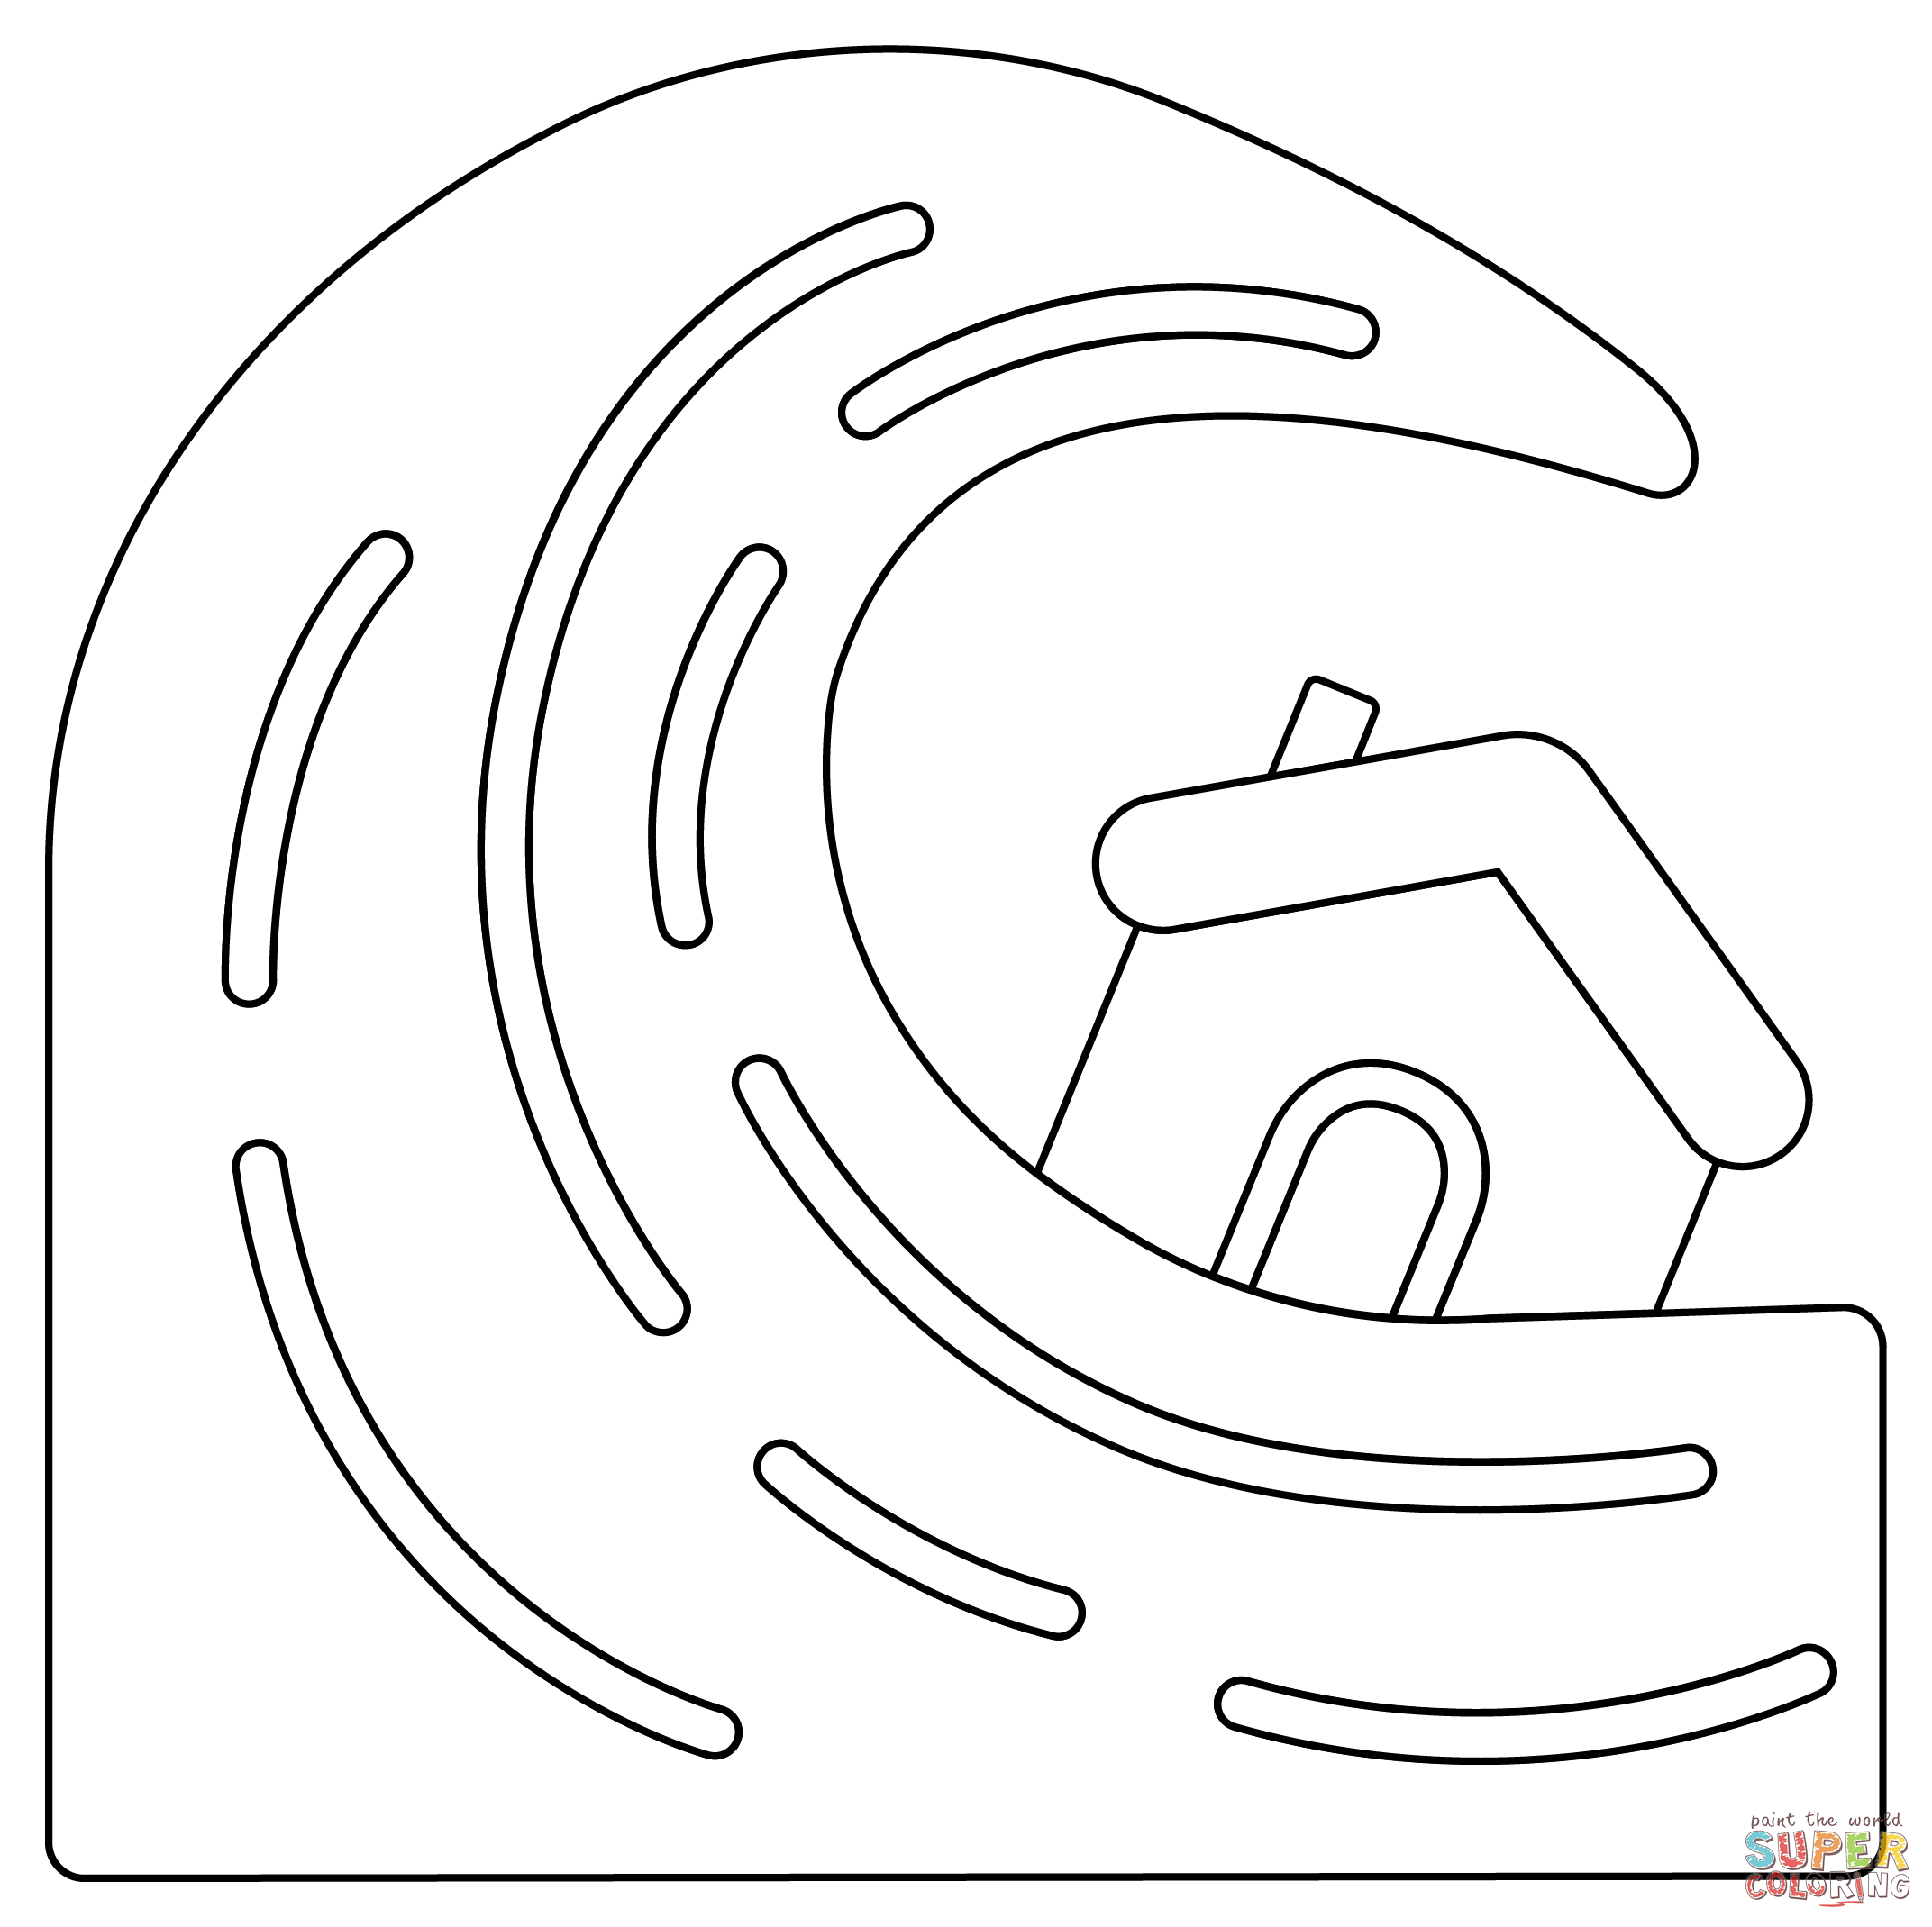 Tsunami coloring page | Free Printable Coloring Pages